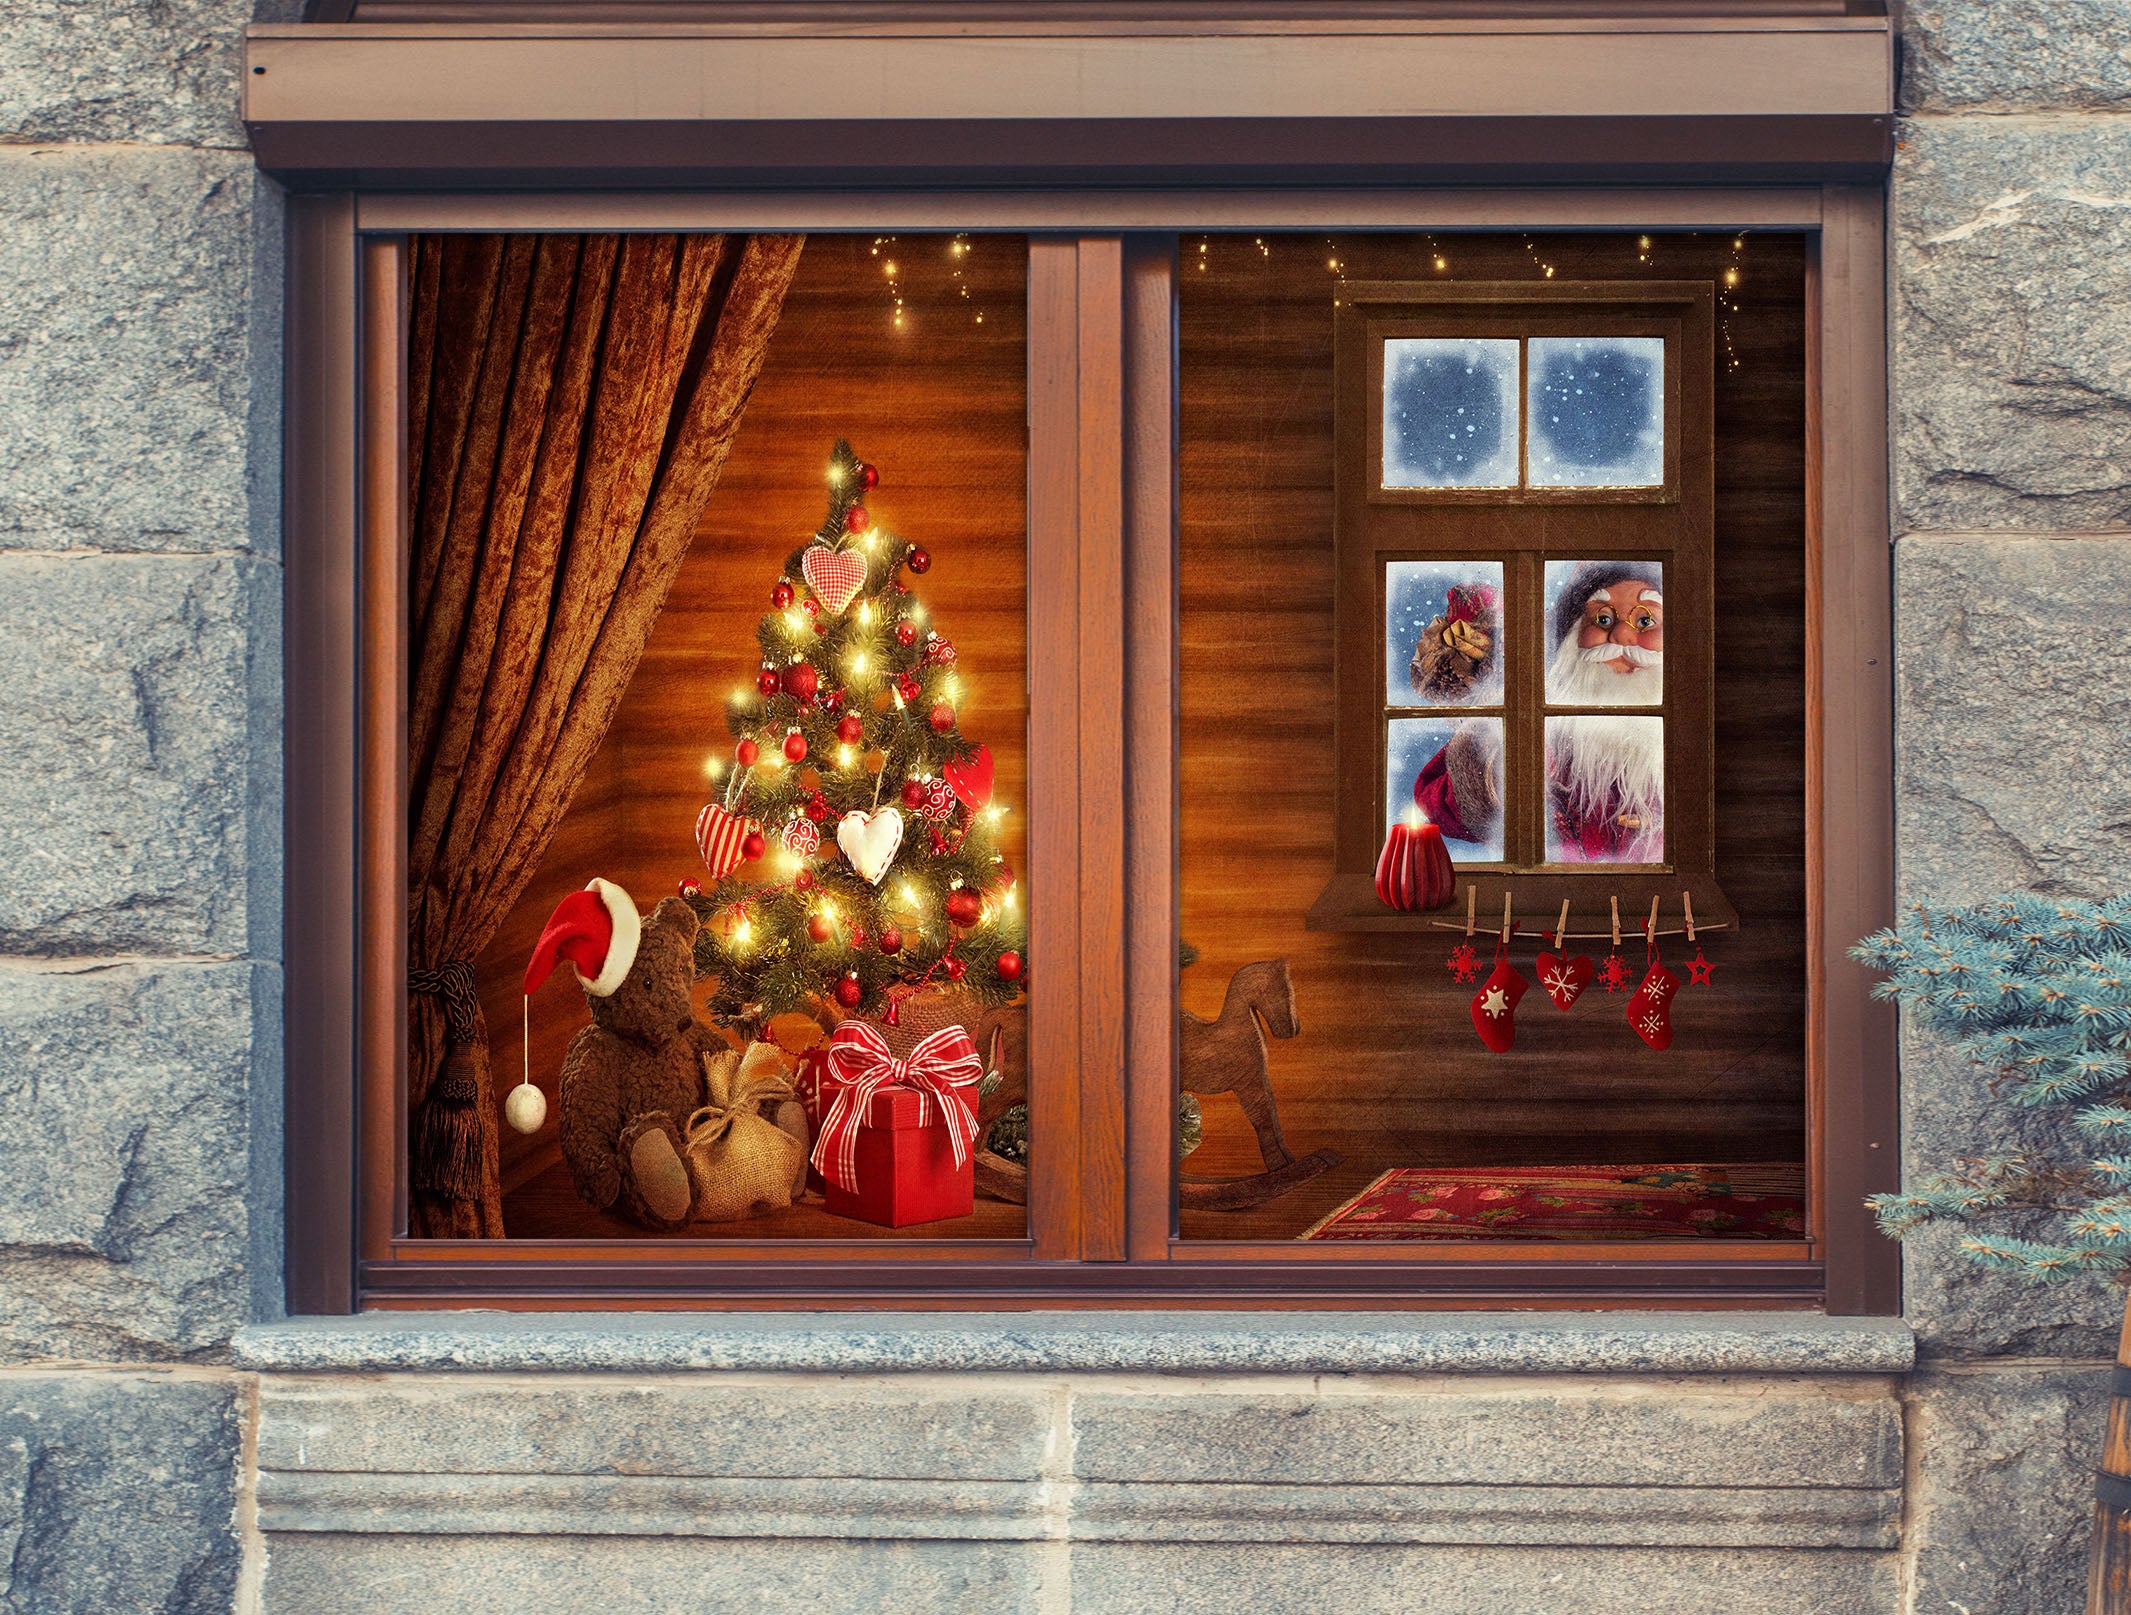 3D Wooden House Santa 42167 Christmas Window Film Print Sticker Cling Stained Glass Xmas